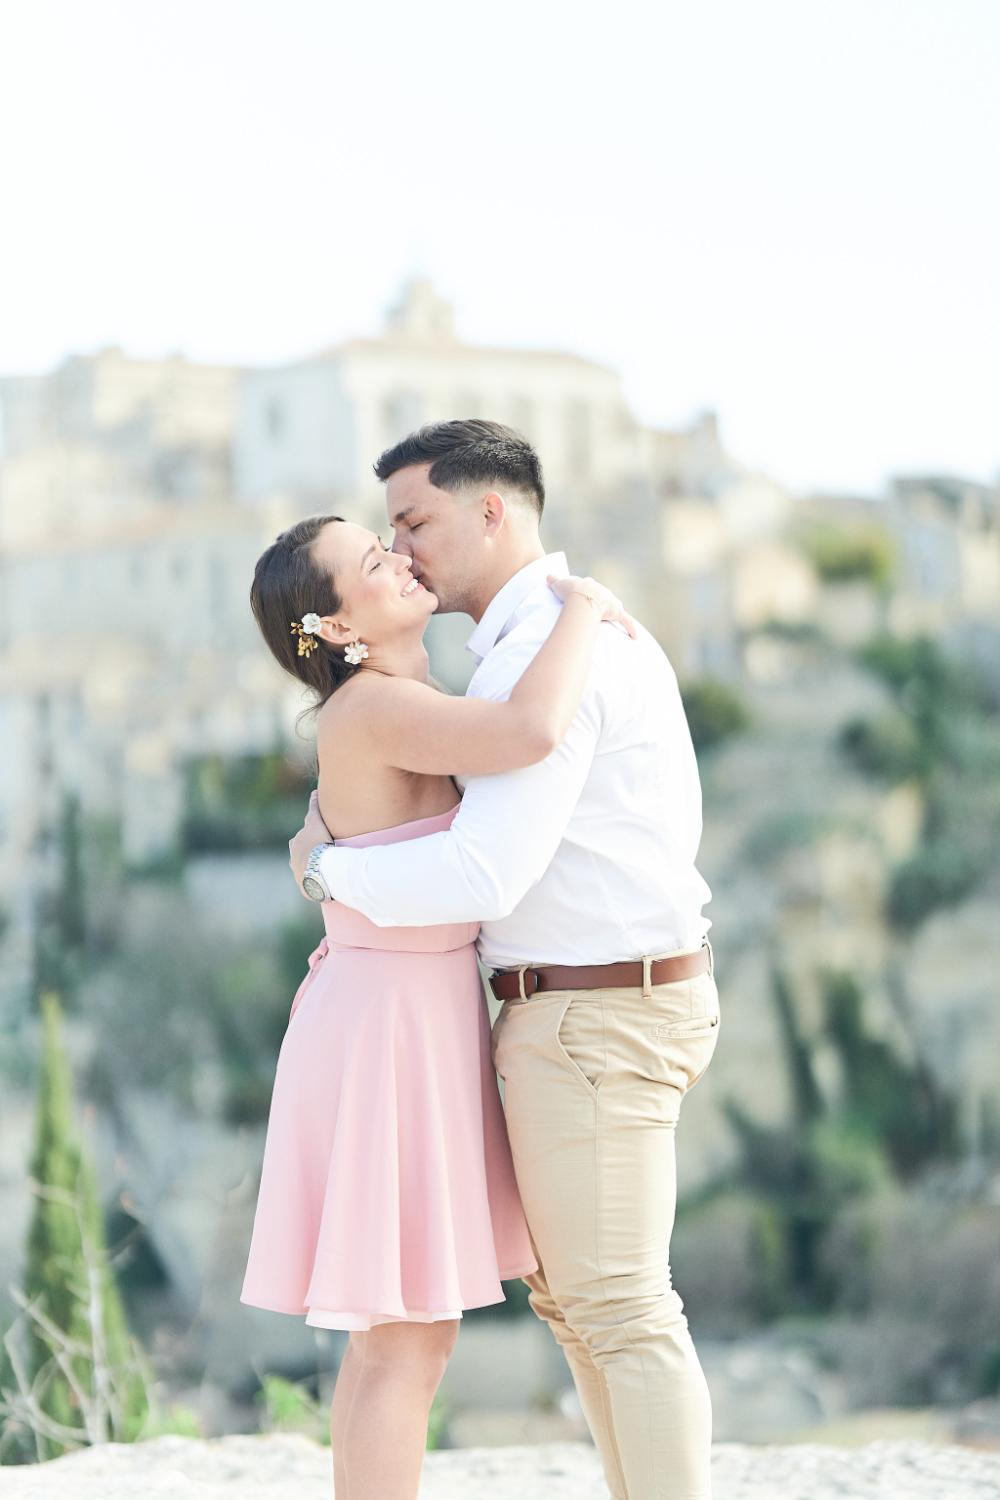 How To Plan A Beautiful Engagement Shoot In Gordes, Provence